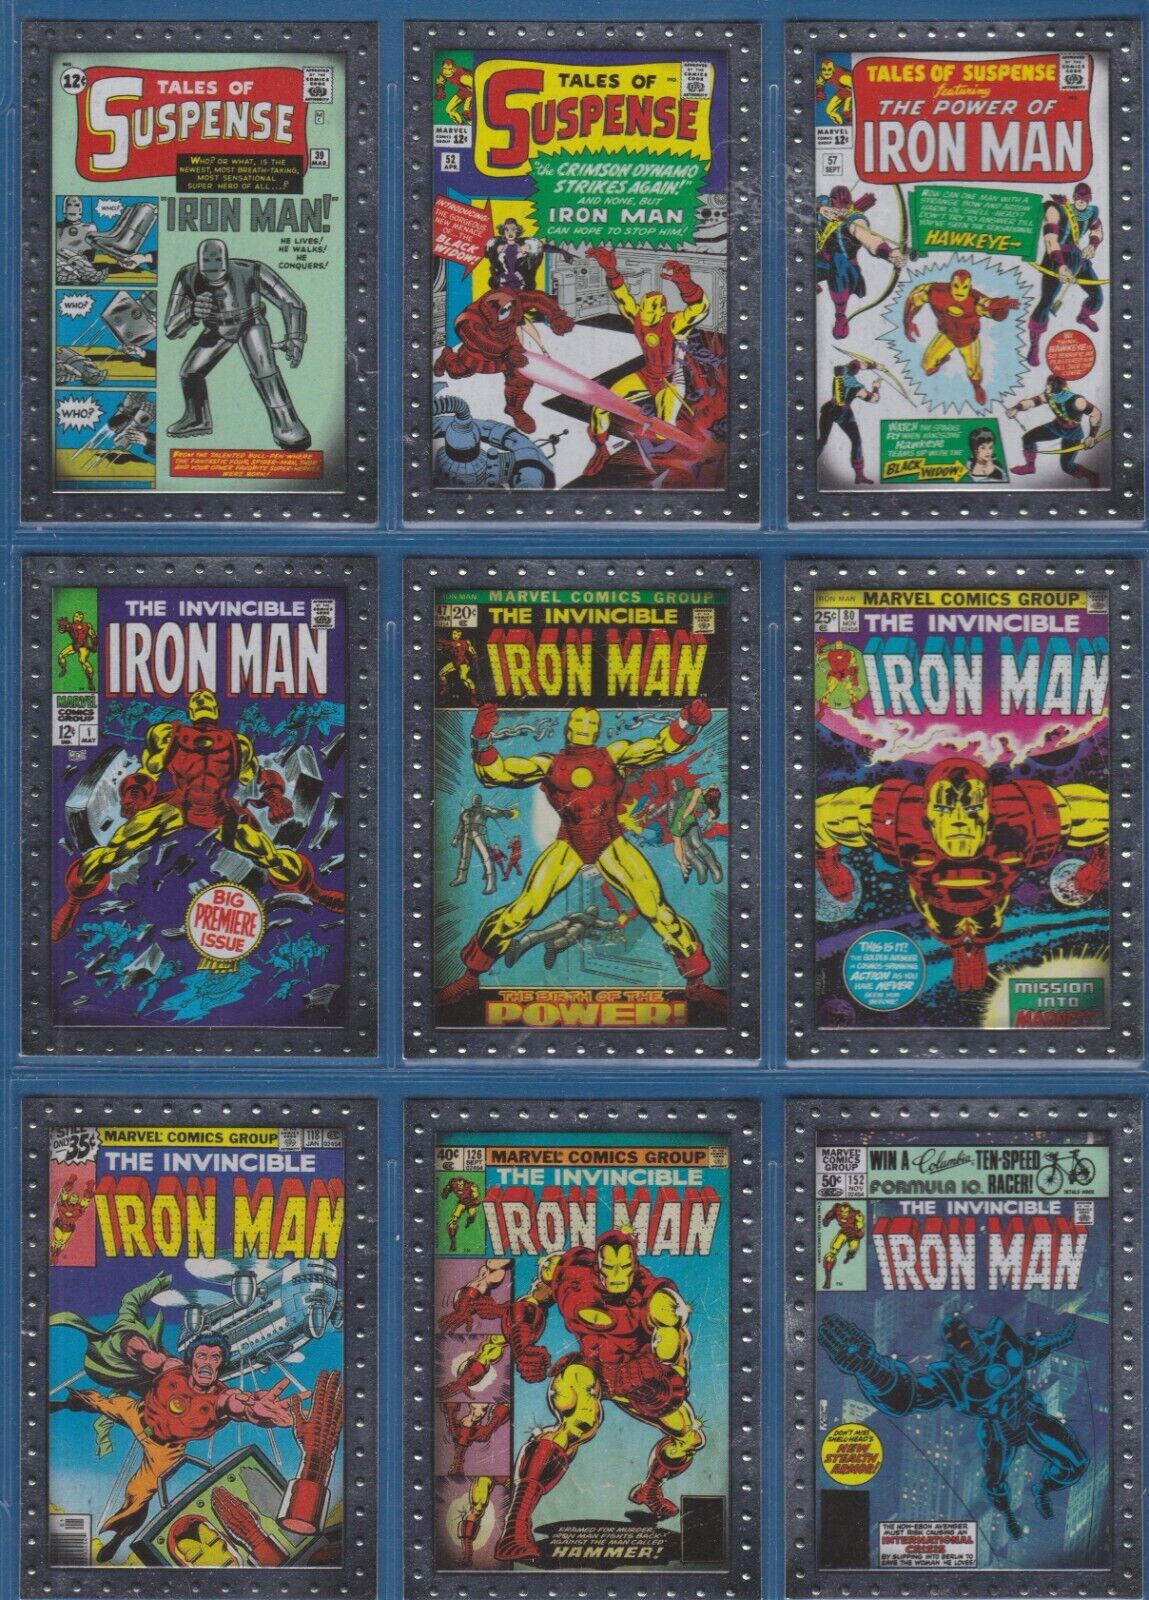 Complete Sub-Set 2010 Upper Deck IRON MAN 2 Embossed Classic Covers Cards CC1-9 